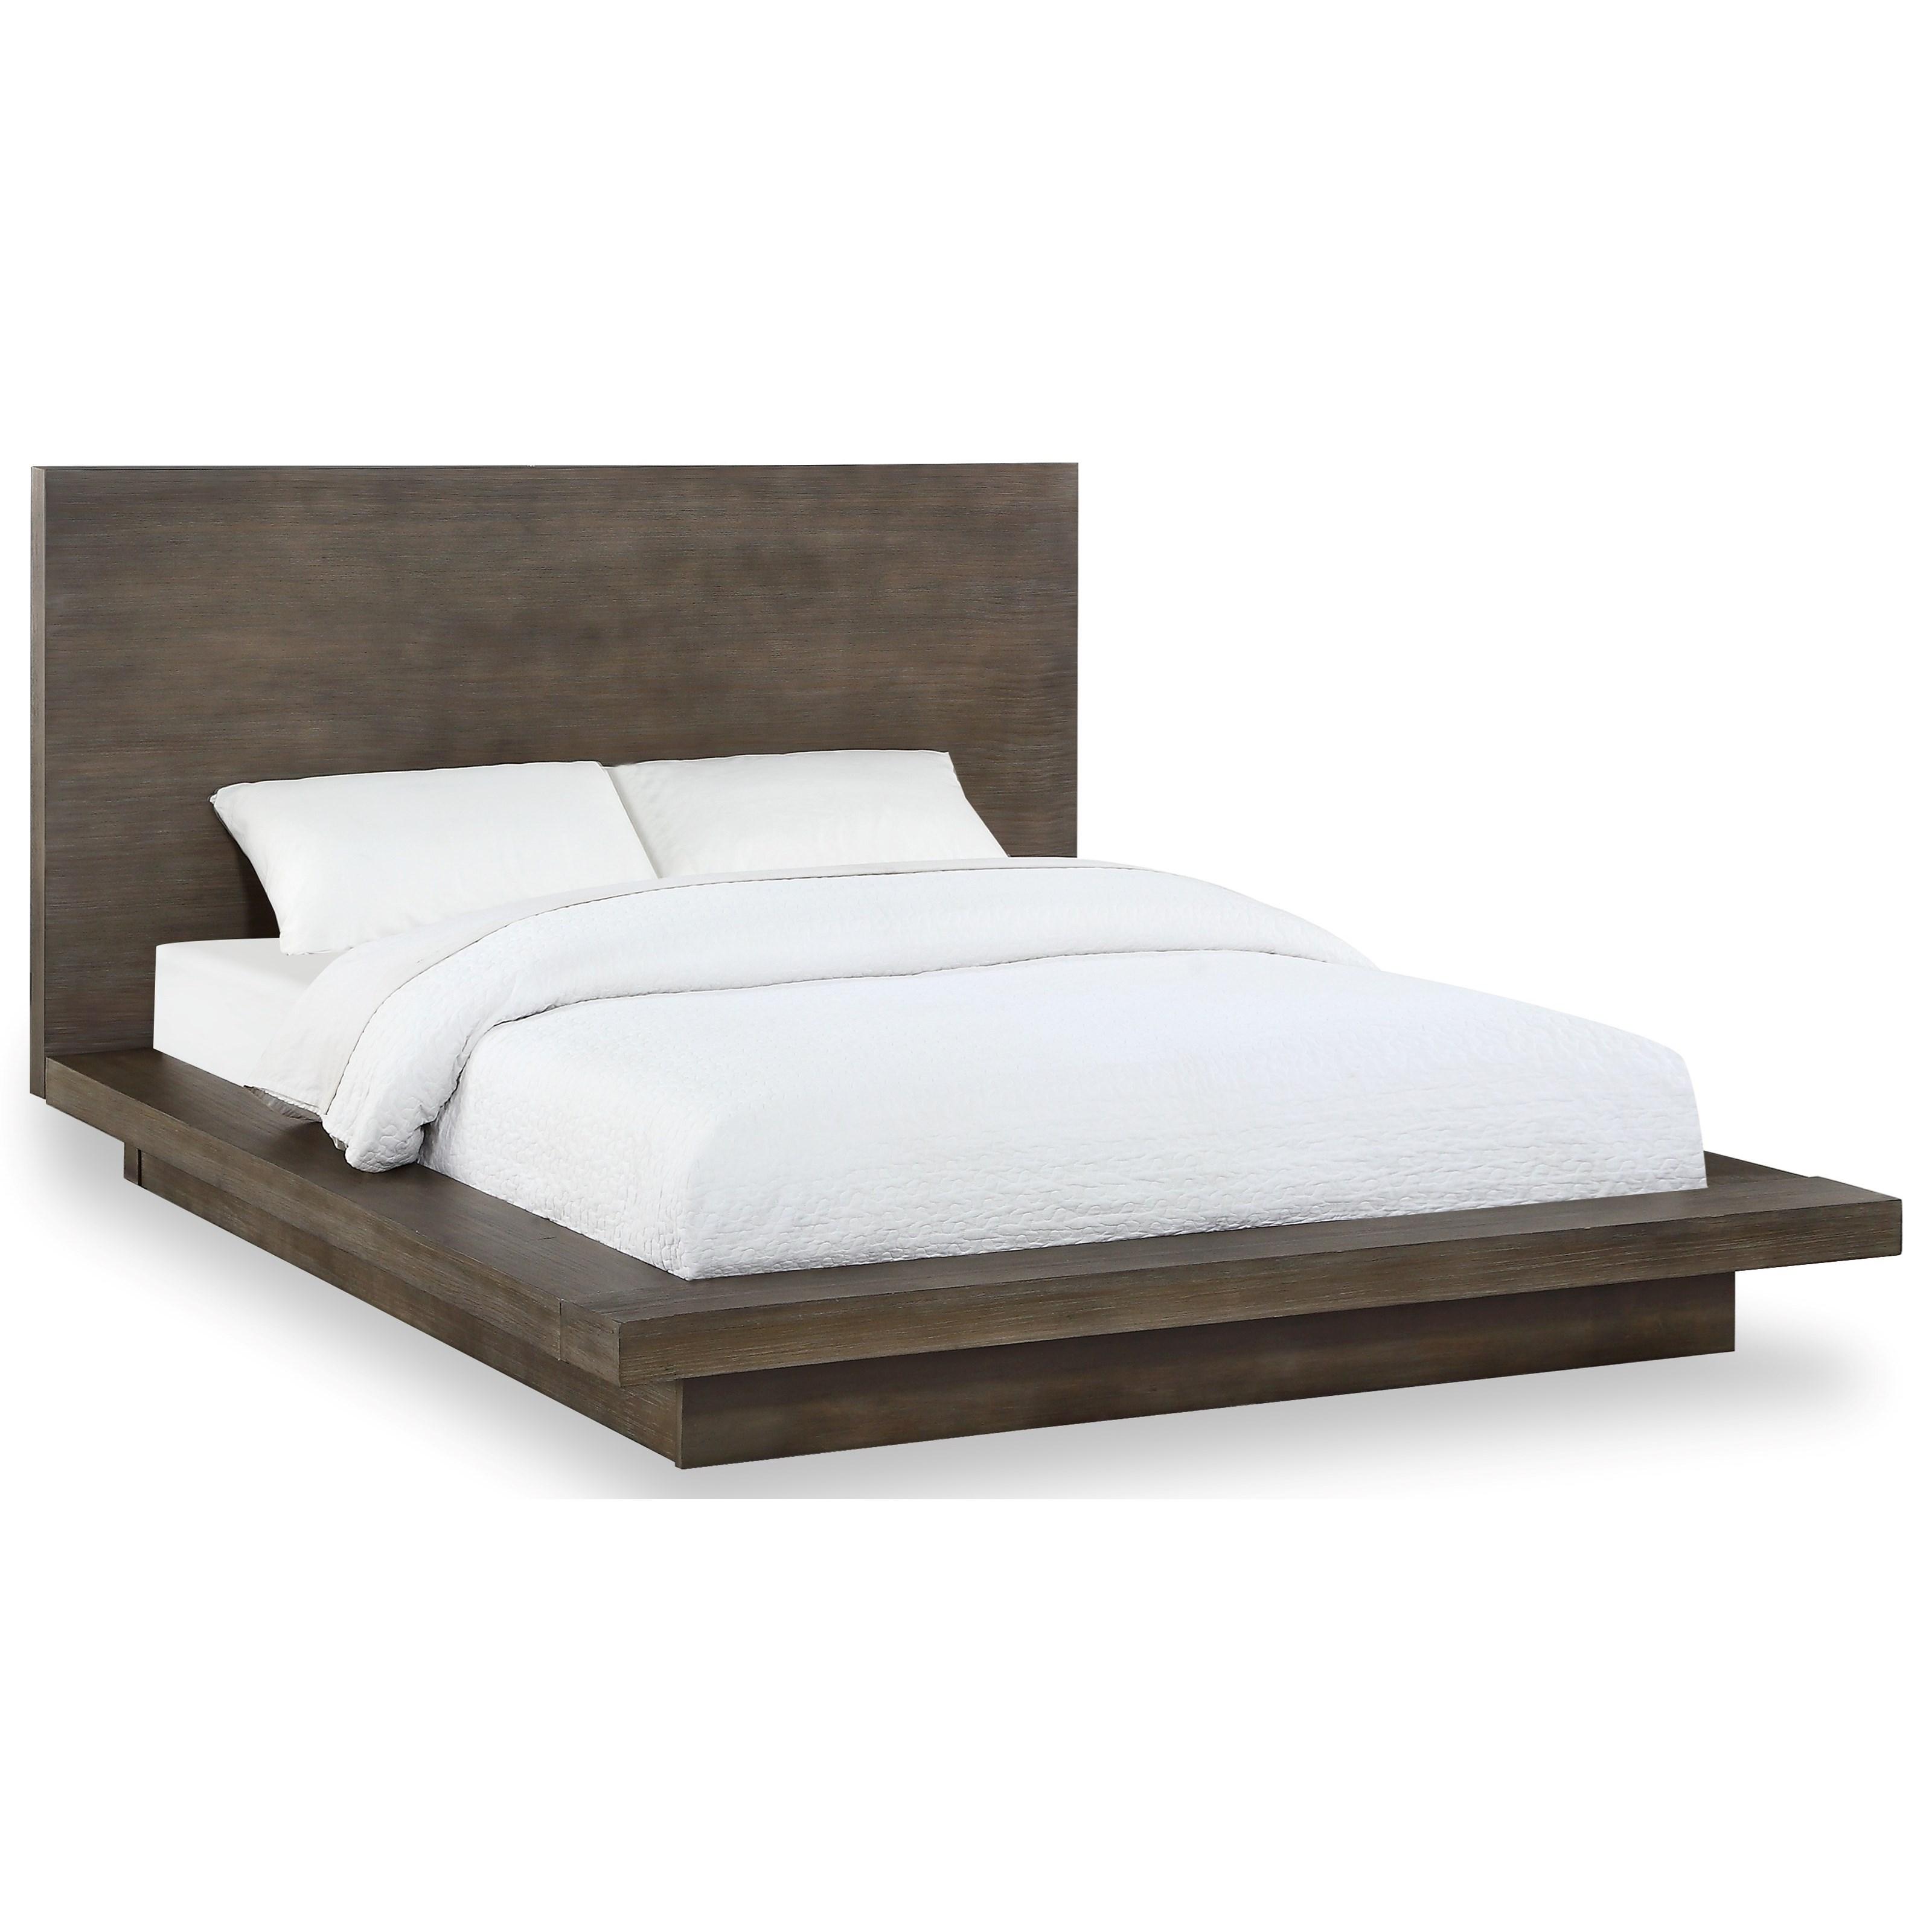 Contemporary, Rustic Platform Bed MELBOURNE 8D64H4 in Brown 